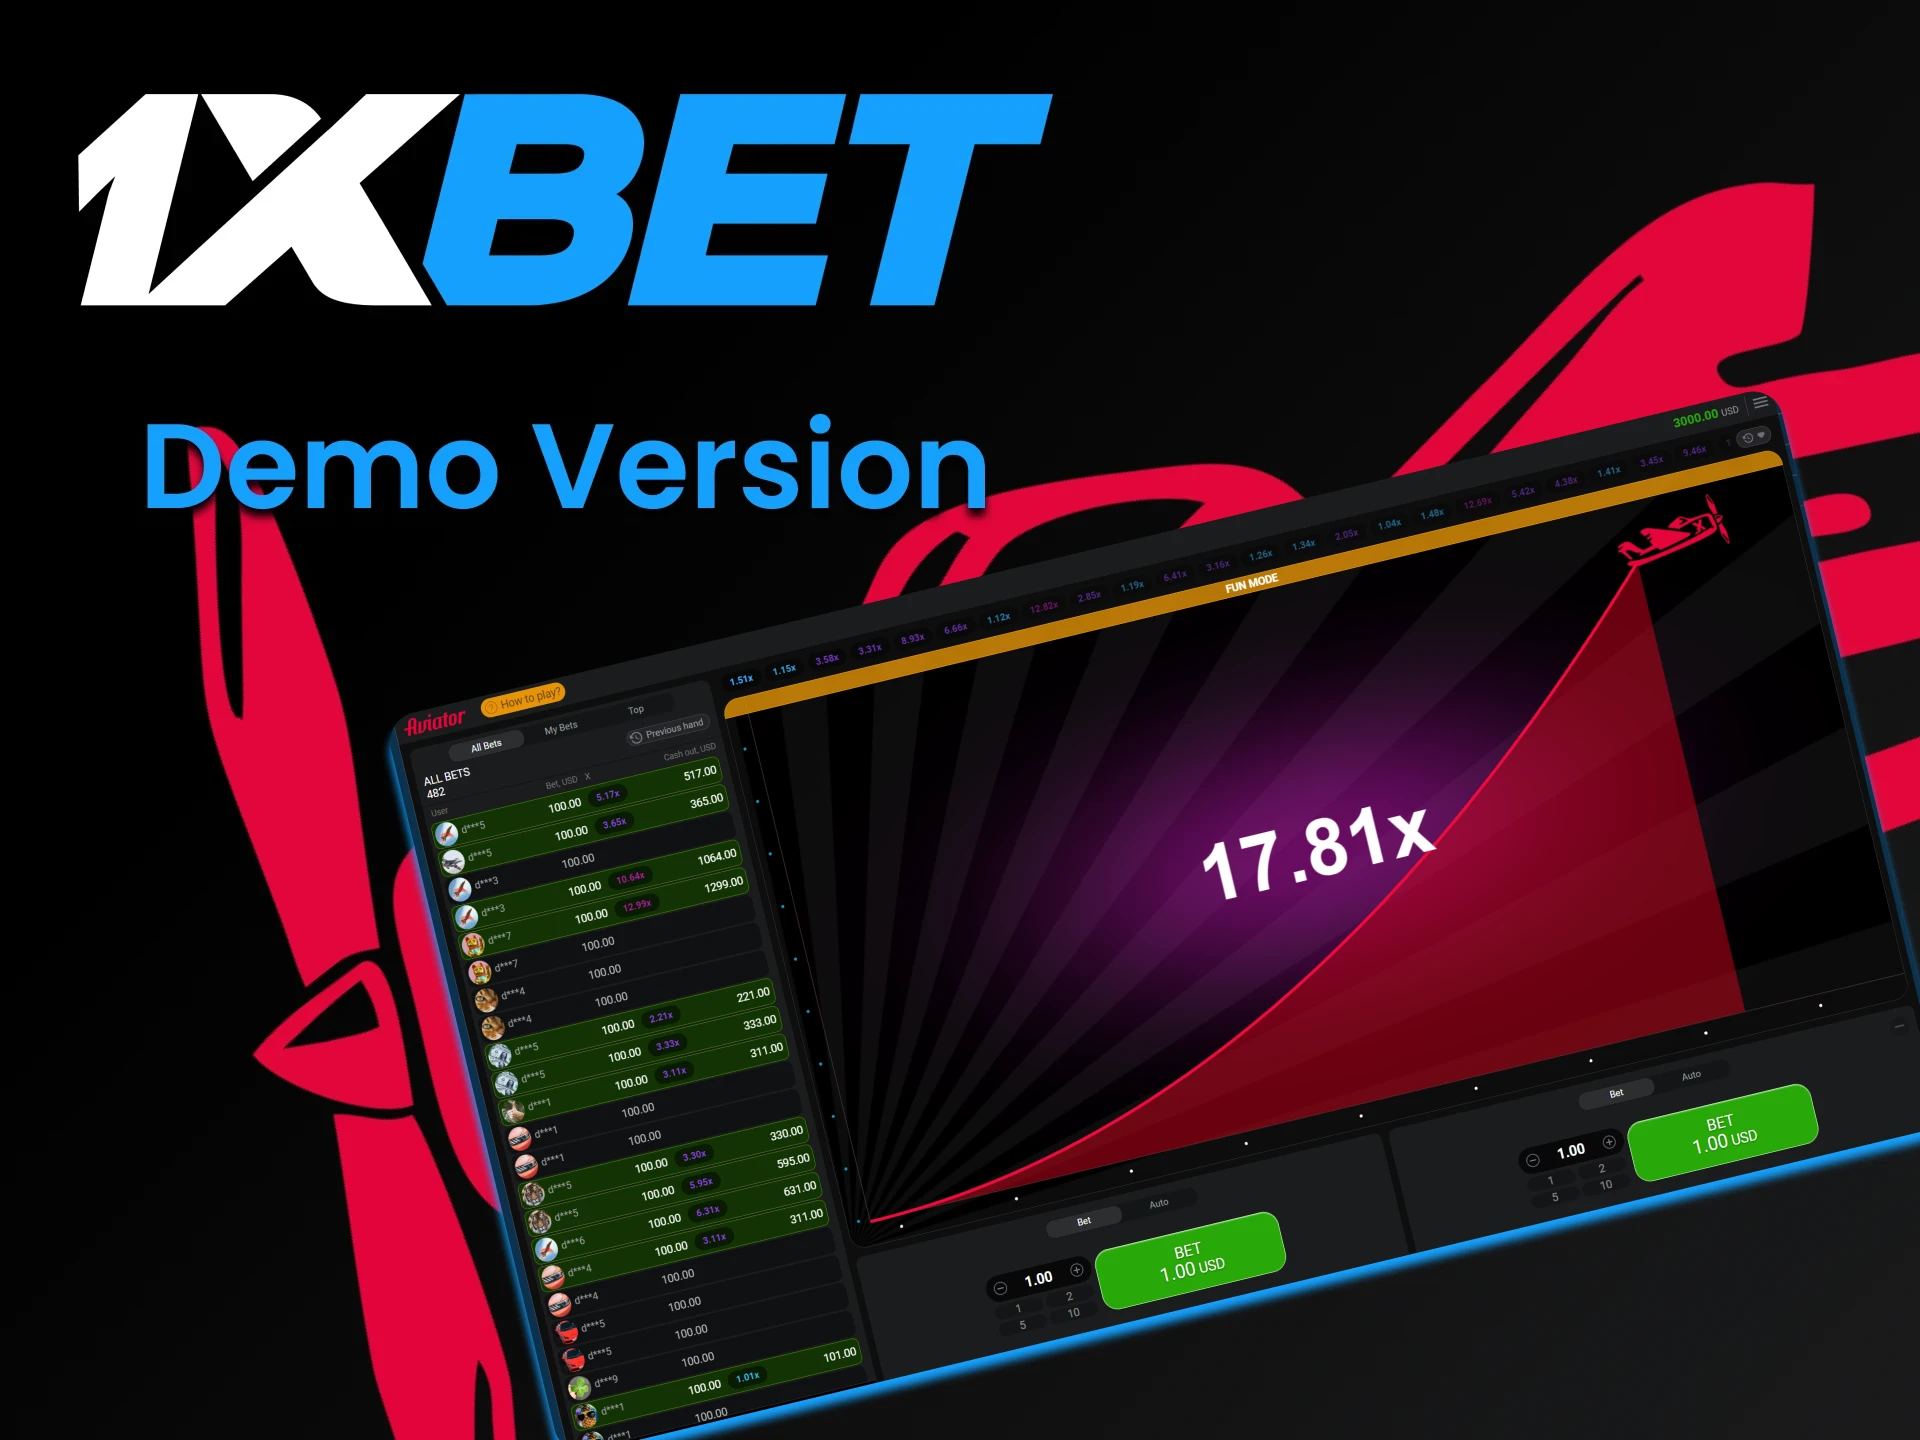 Before playing for real money, you can practice in a special version of the Aviator game from 1xbet.